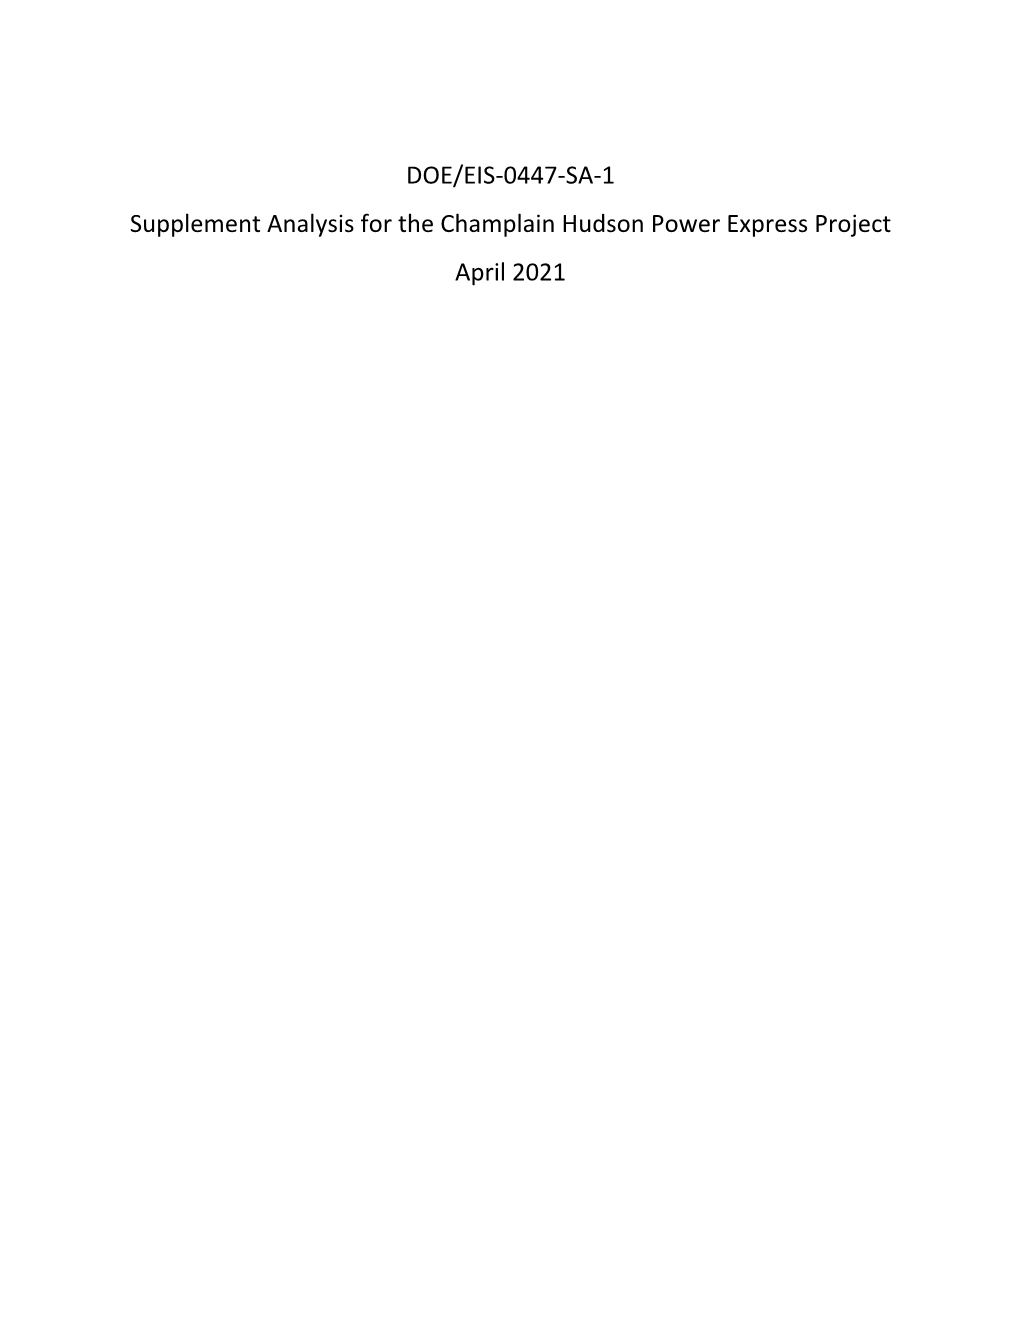 Supplement Analysis for the Champlain Hudson Power Express Project April 2021